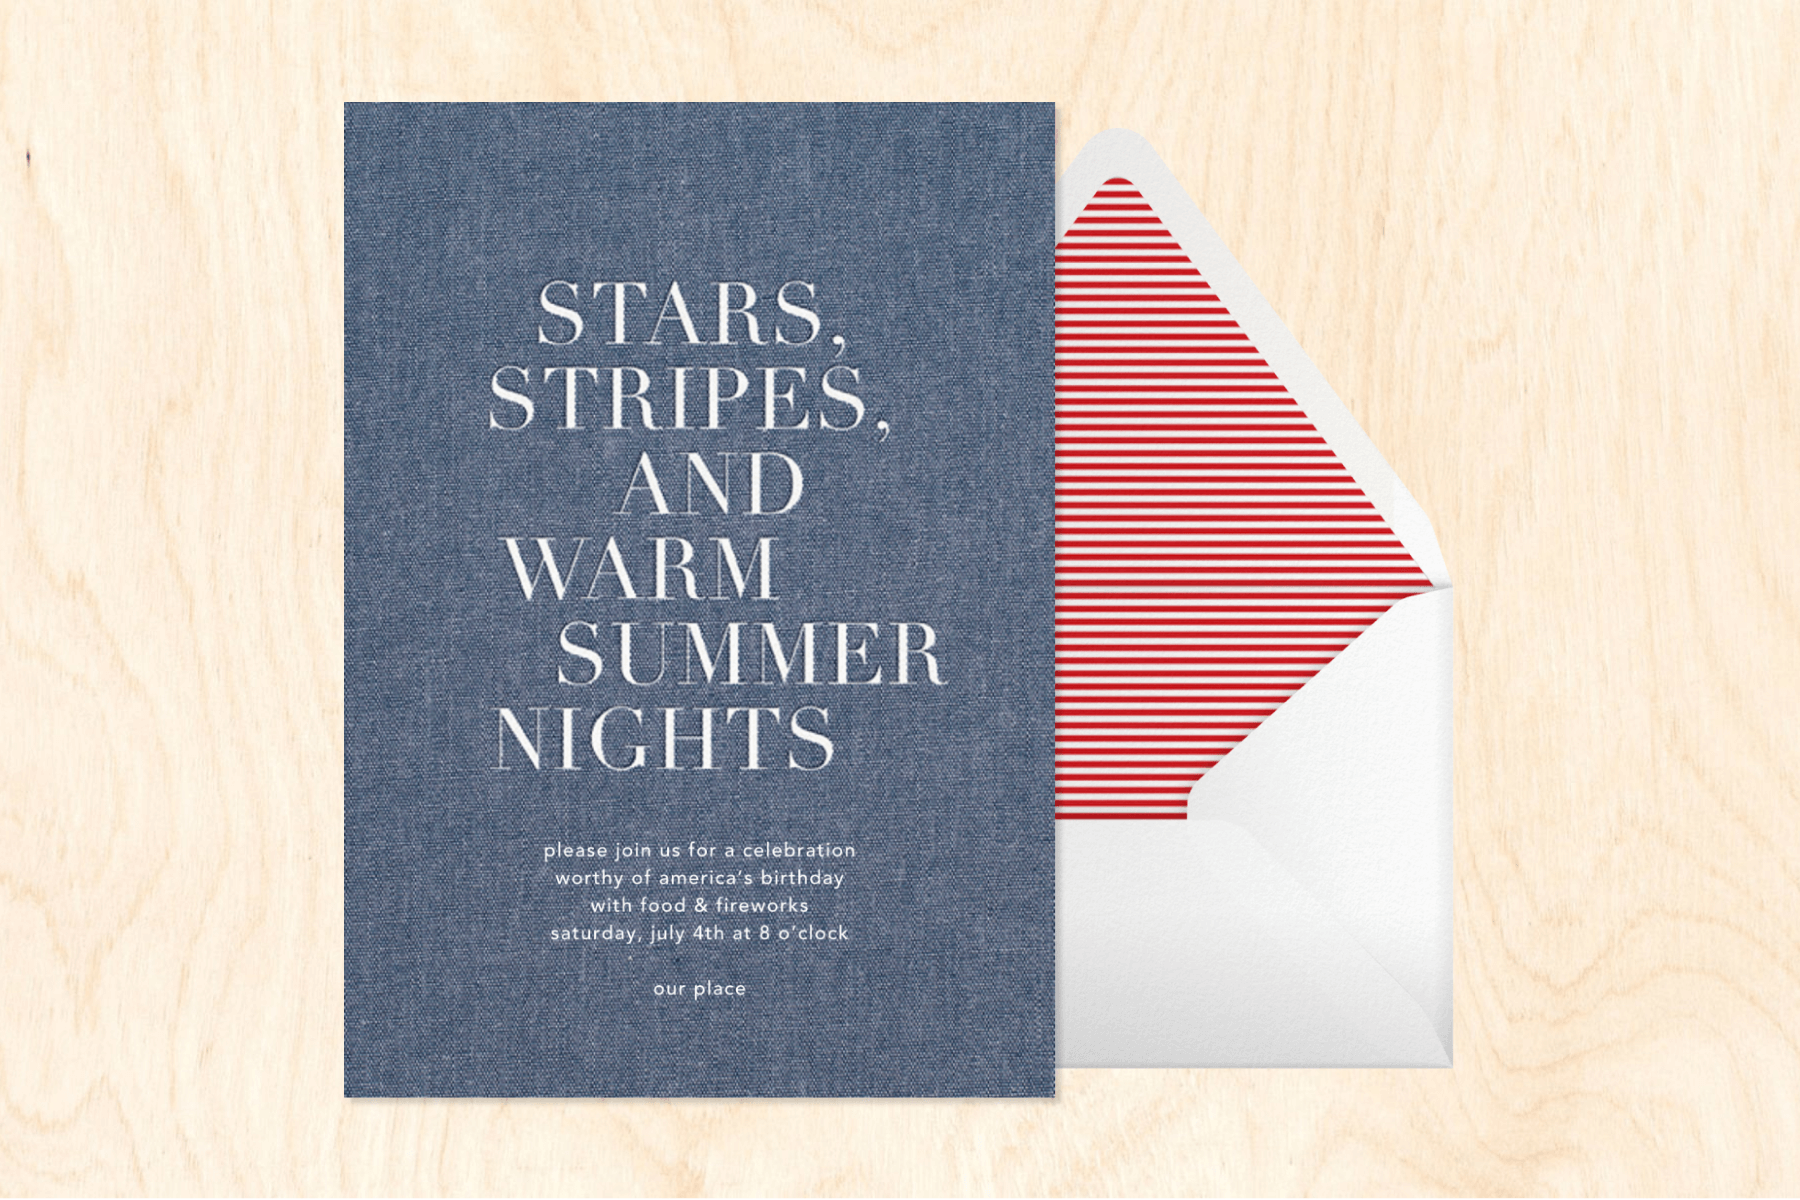 A chambray invitation reads STARS, STRIPES, AND WARM SUMMER NIGHTS beside a white envelope with red striped liner